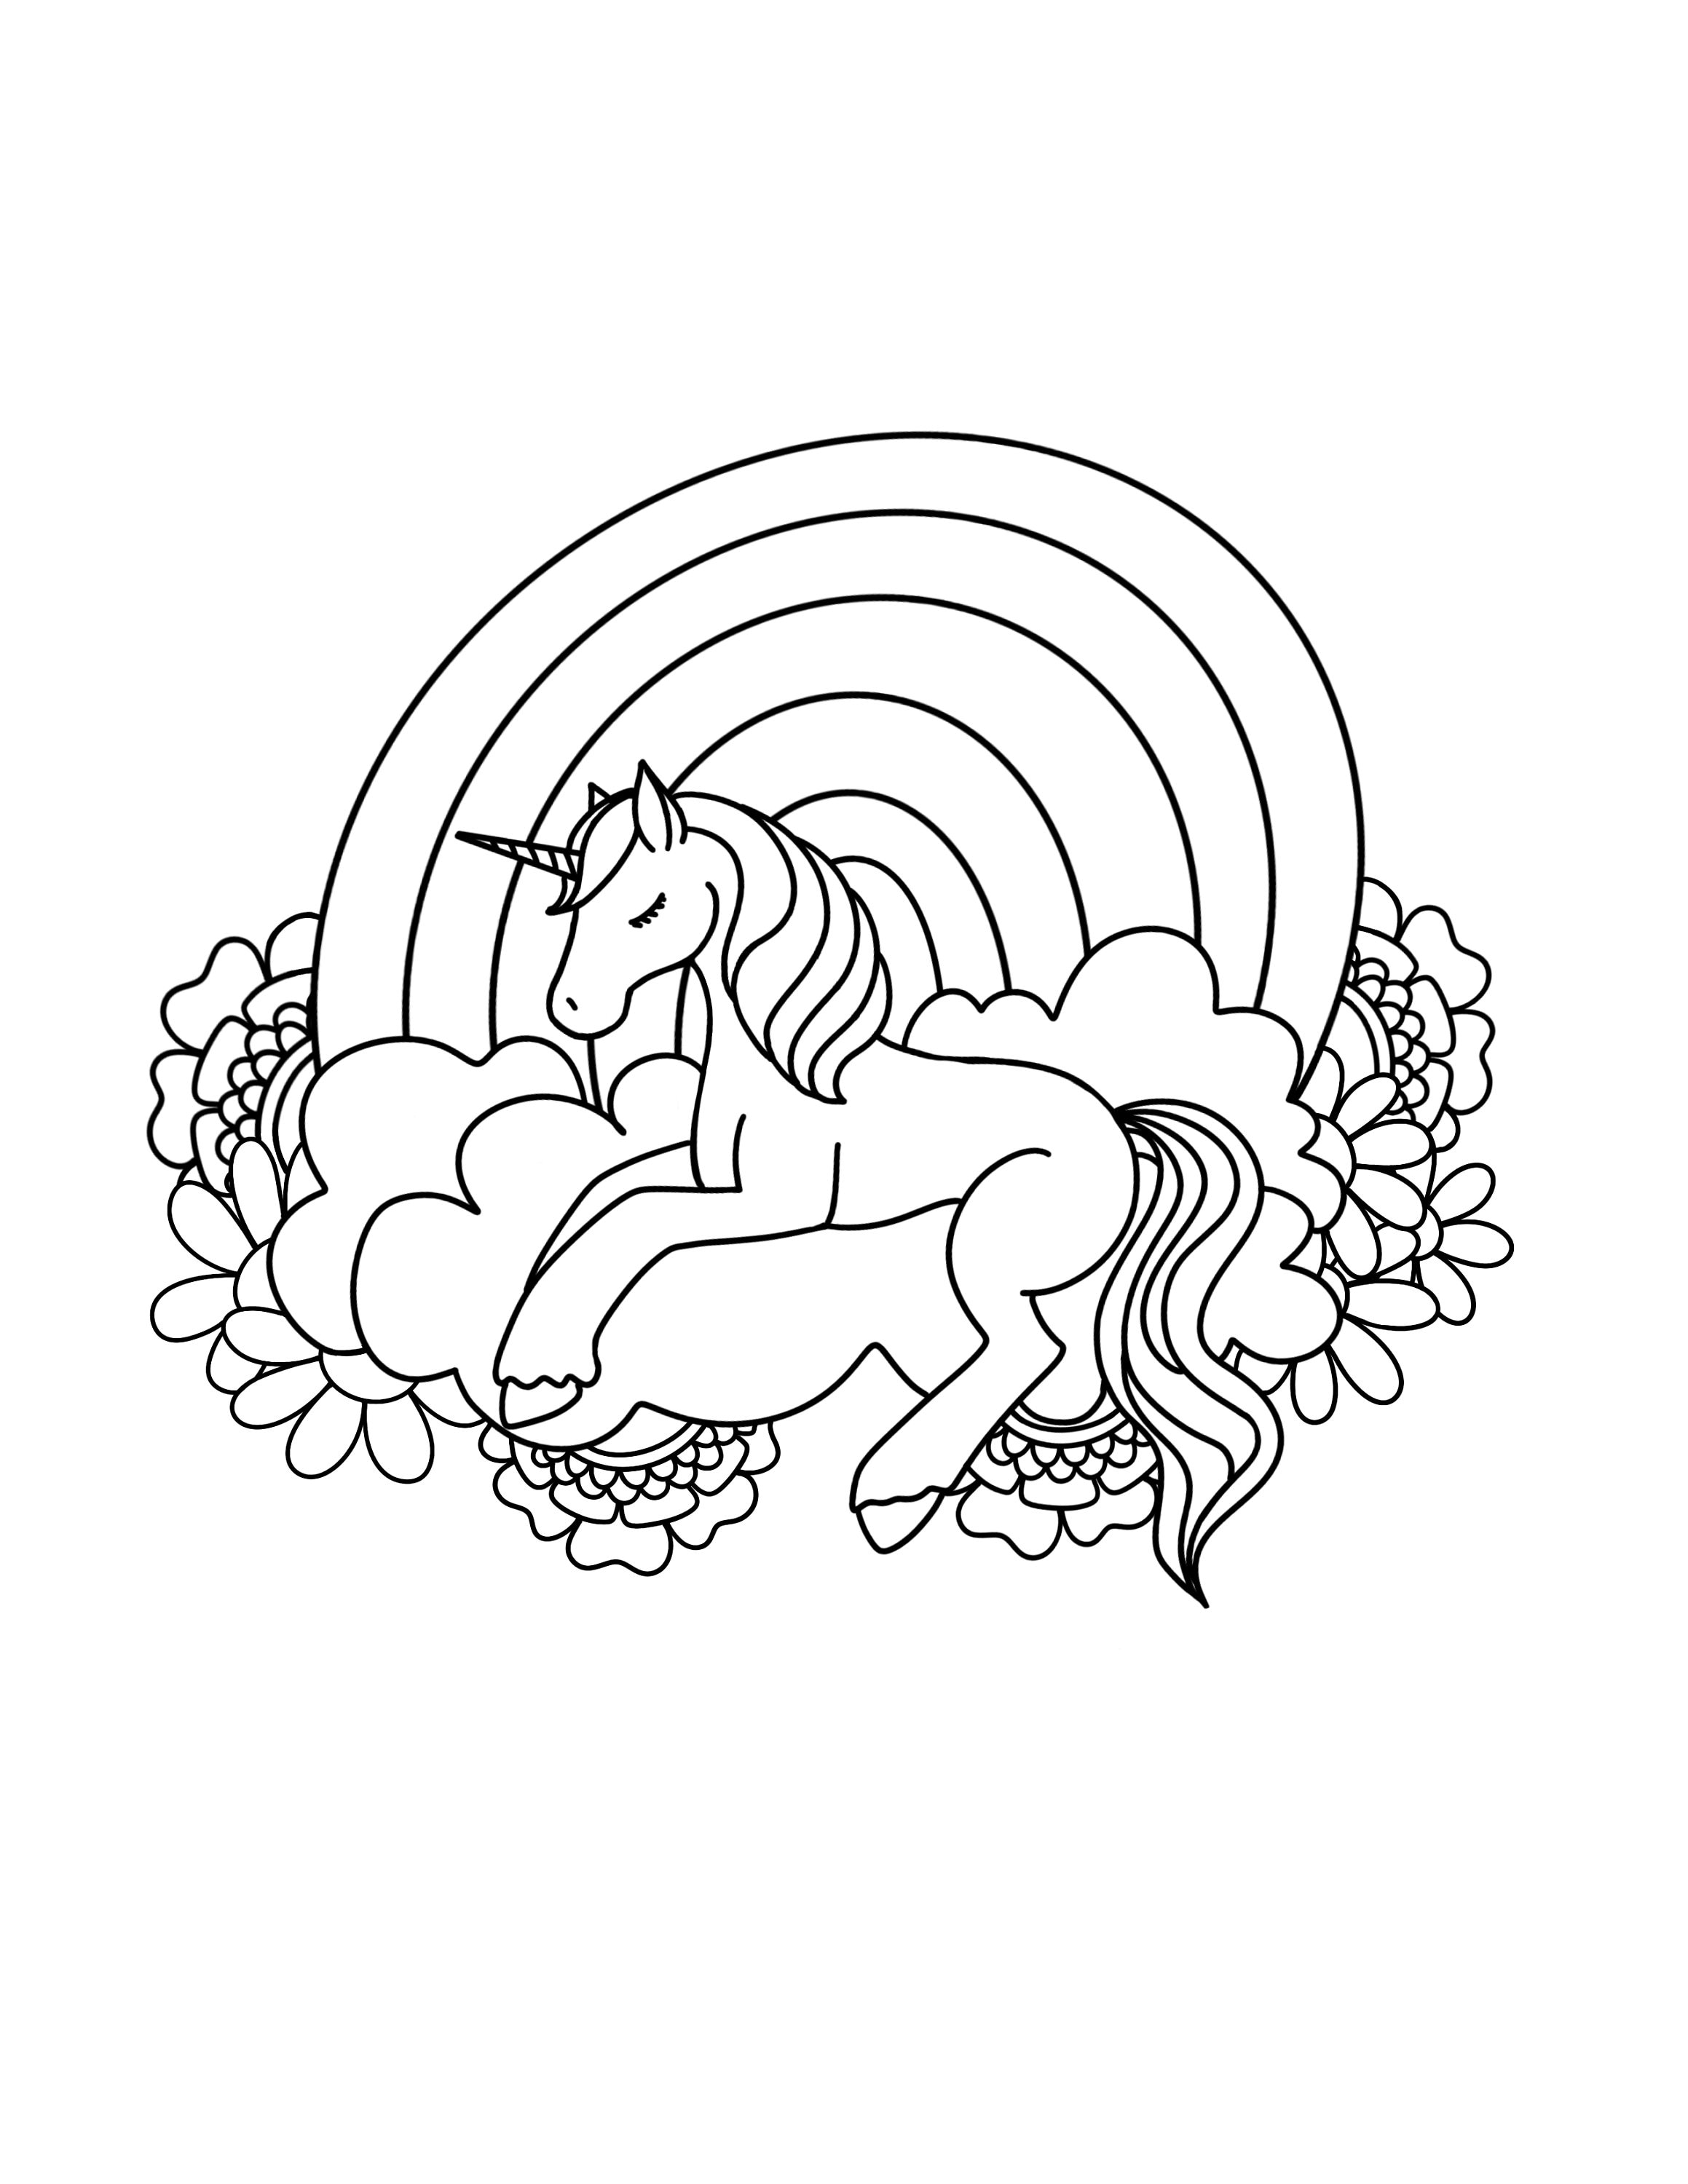 Unicorn coloring page for kids printable unicorn coloring page download png pdf jpg